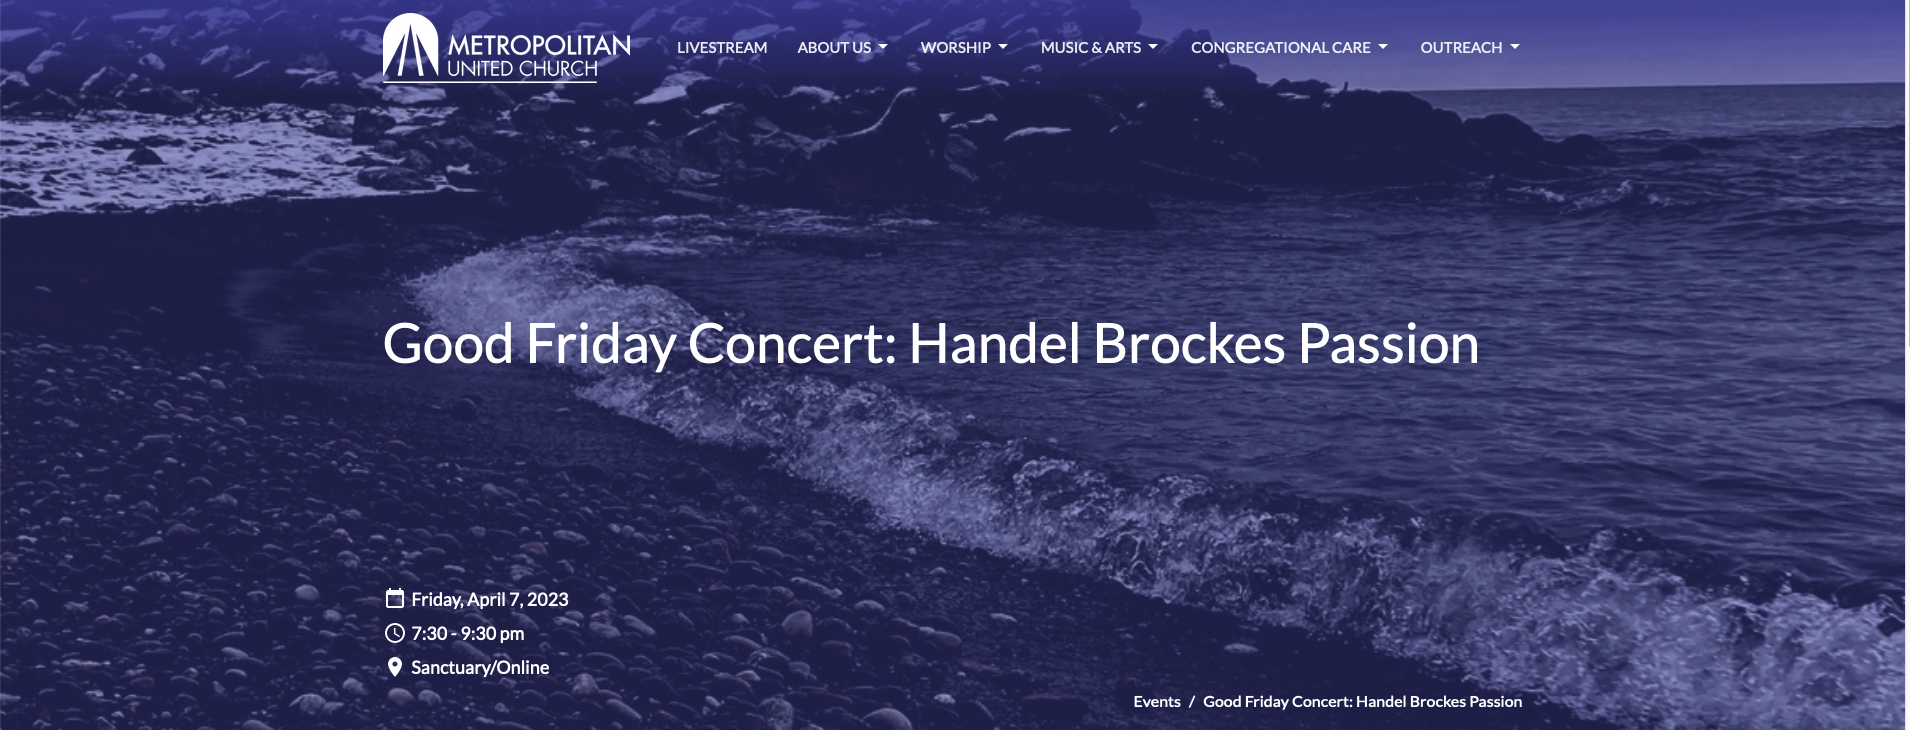 Banner of the MET United Church website announcing Handel's Brokes Passion, showing a beach and rolling waves on the background